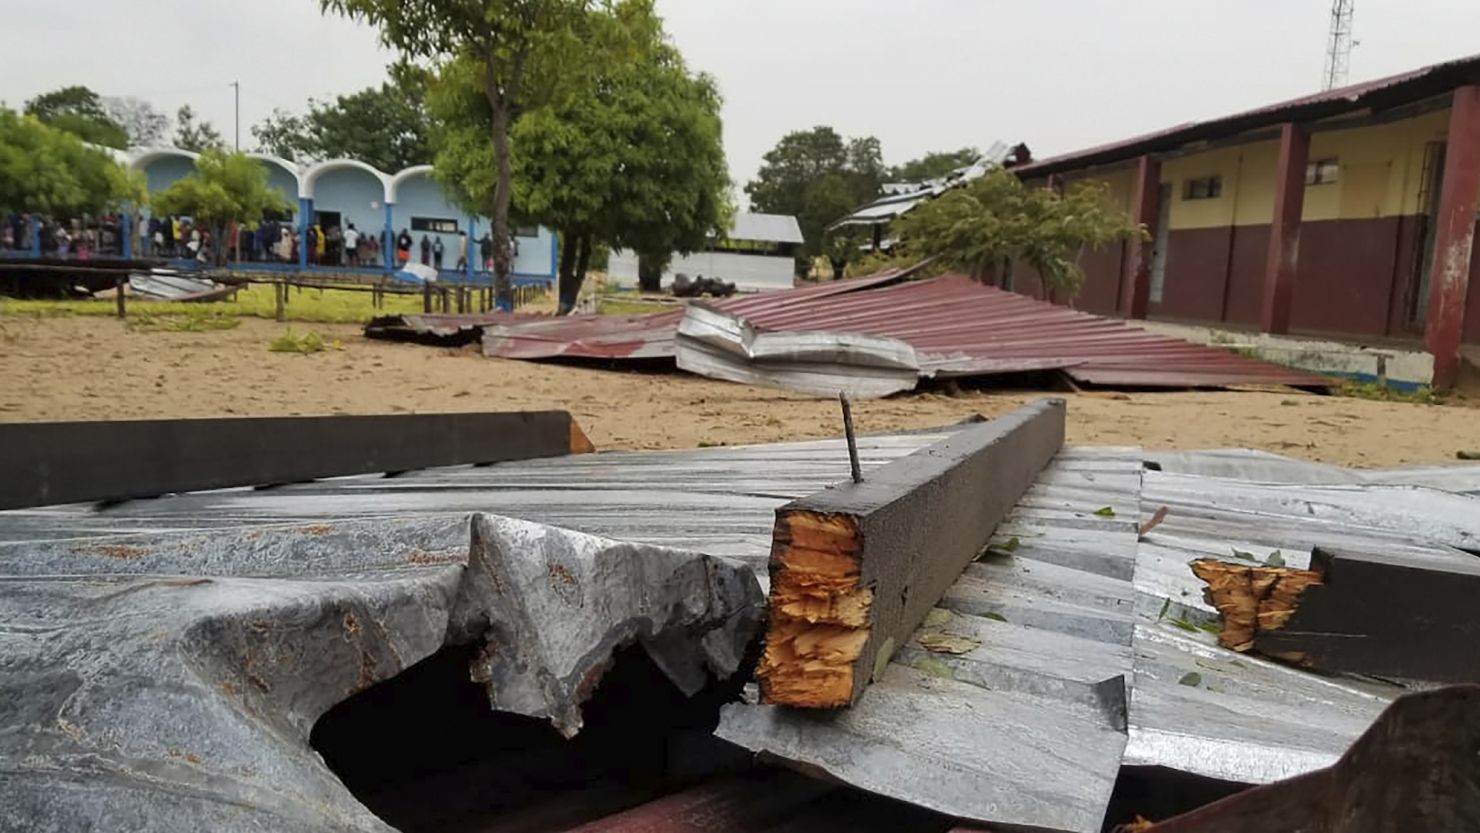 The damaged roof of a school lies in the playground in Vilanculos, Mozambique, on Feb. 24, 2023. The country is bracing for a rare second hit by long-lasting Tropical Cyclone Freddy.